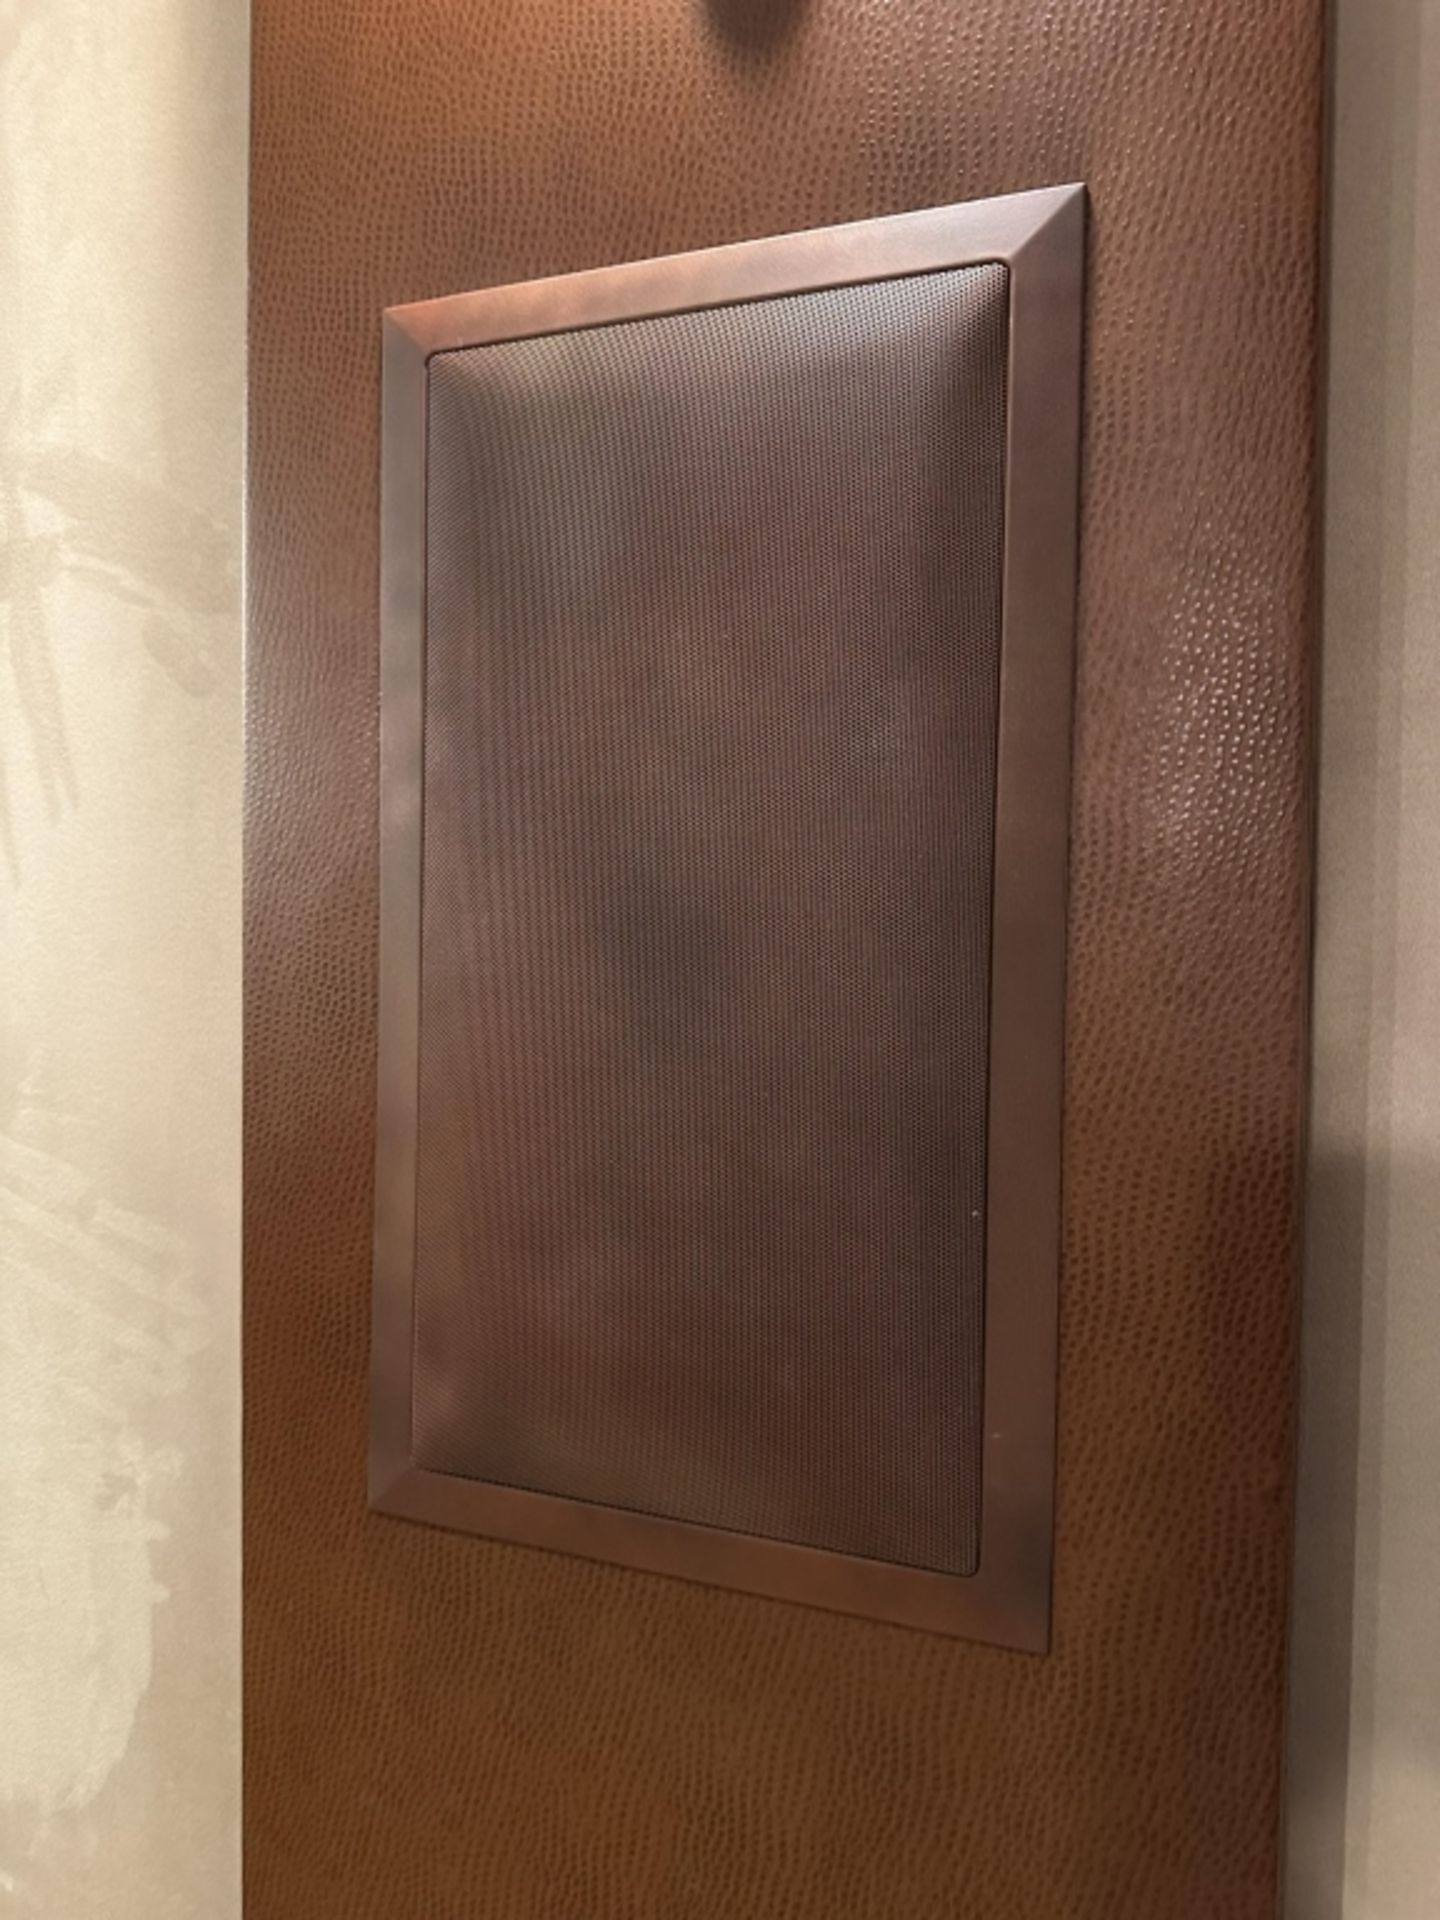 LOT CONSISTING OF (6) KLIPSCH THX WALL MOUNTED SPEAKERS (PAINTED BROWN) - Image 3 of 4